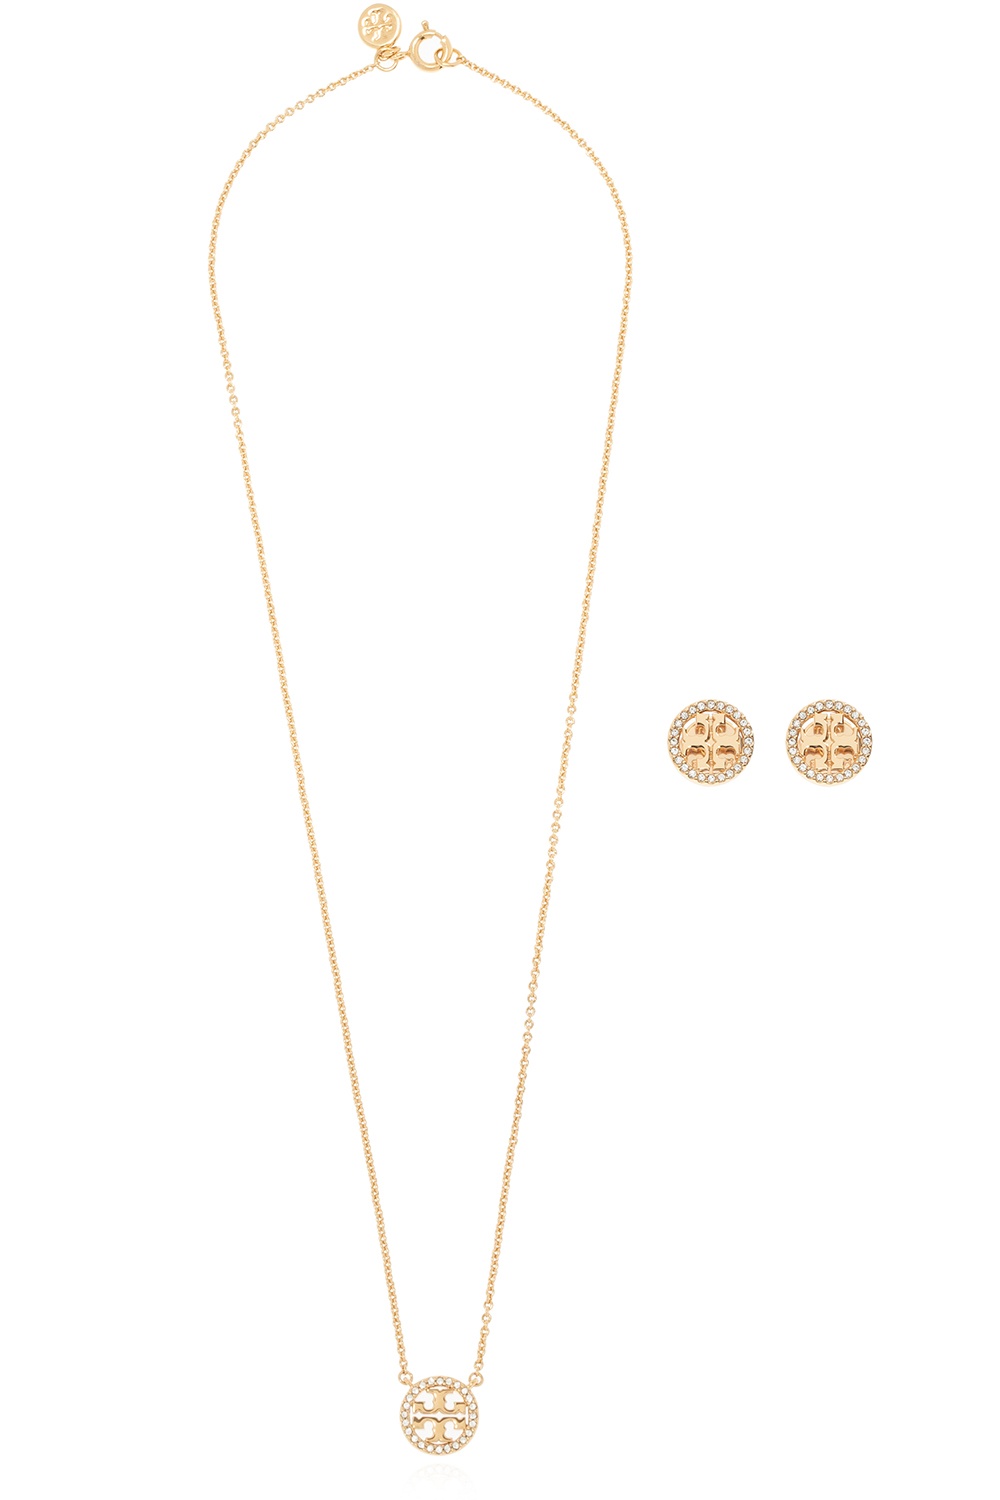 Tory burch earring and necklace 